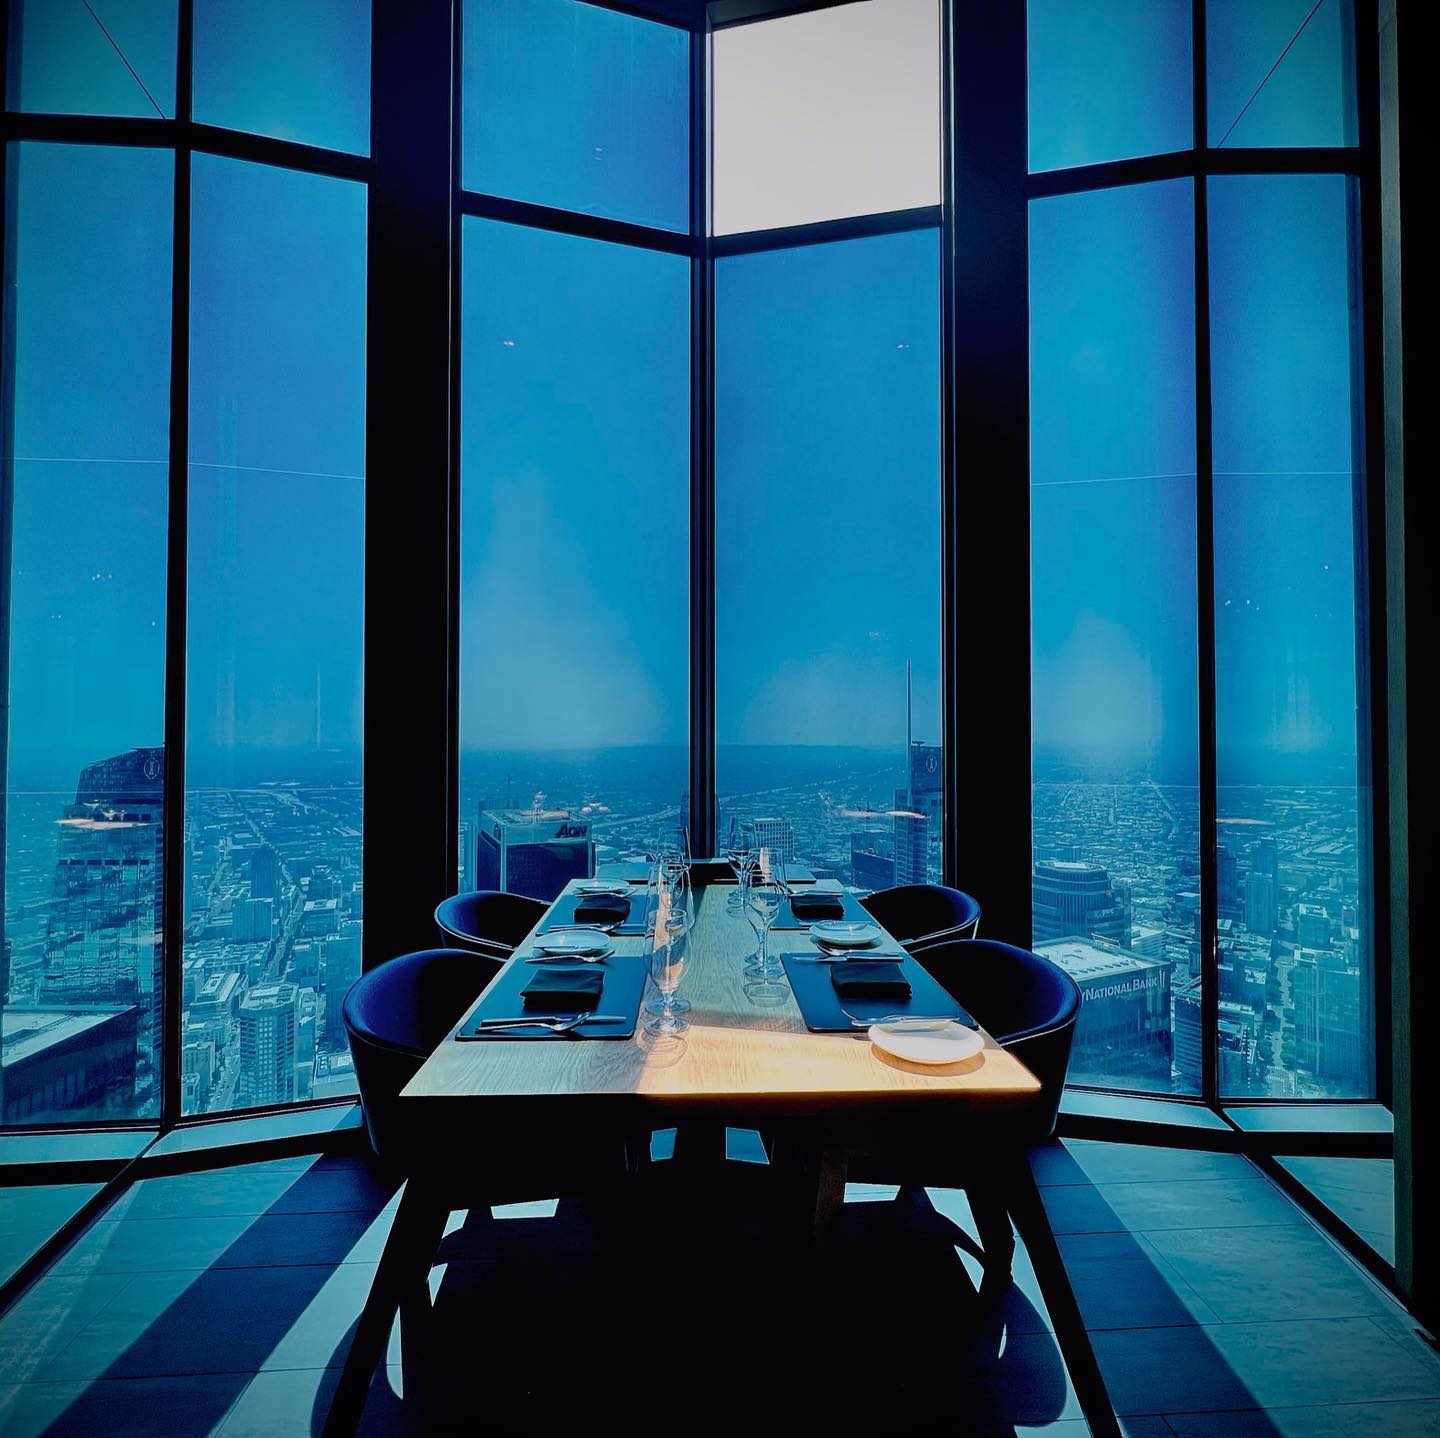 Natural lighting casts a faint blue hue on the floor-to-ceiling window glass of 71Above in Los Angeles